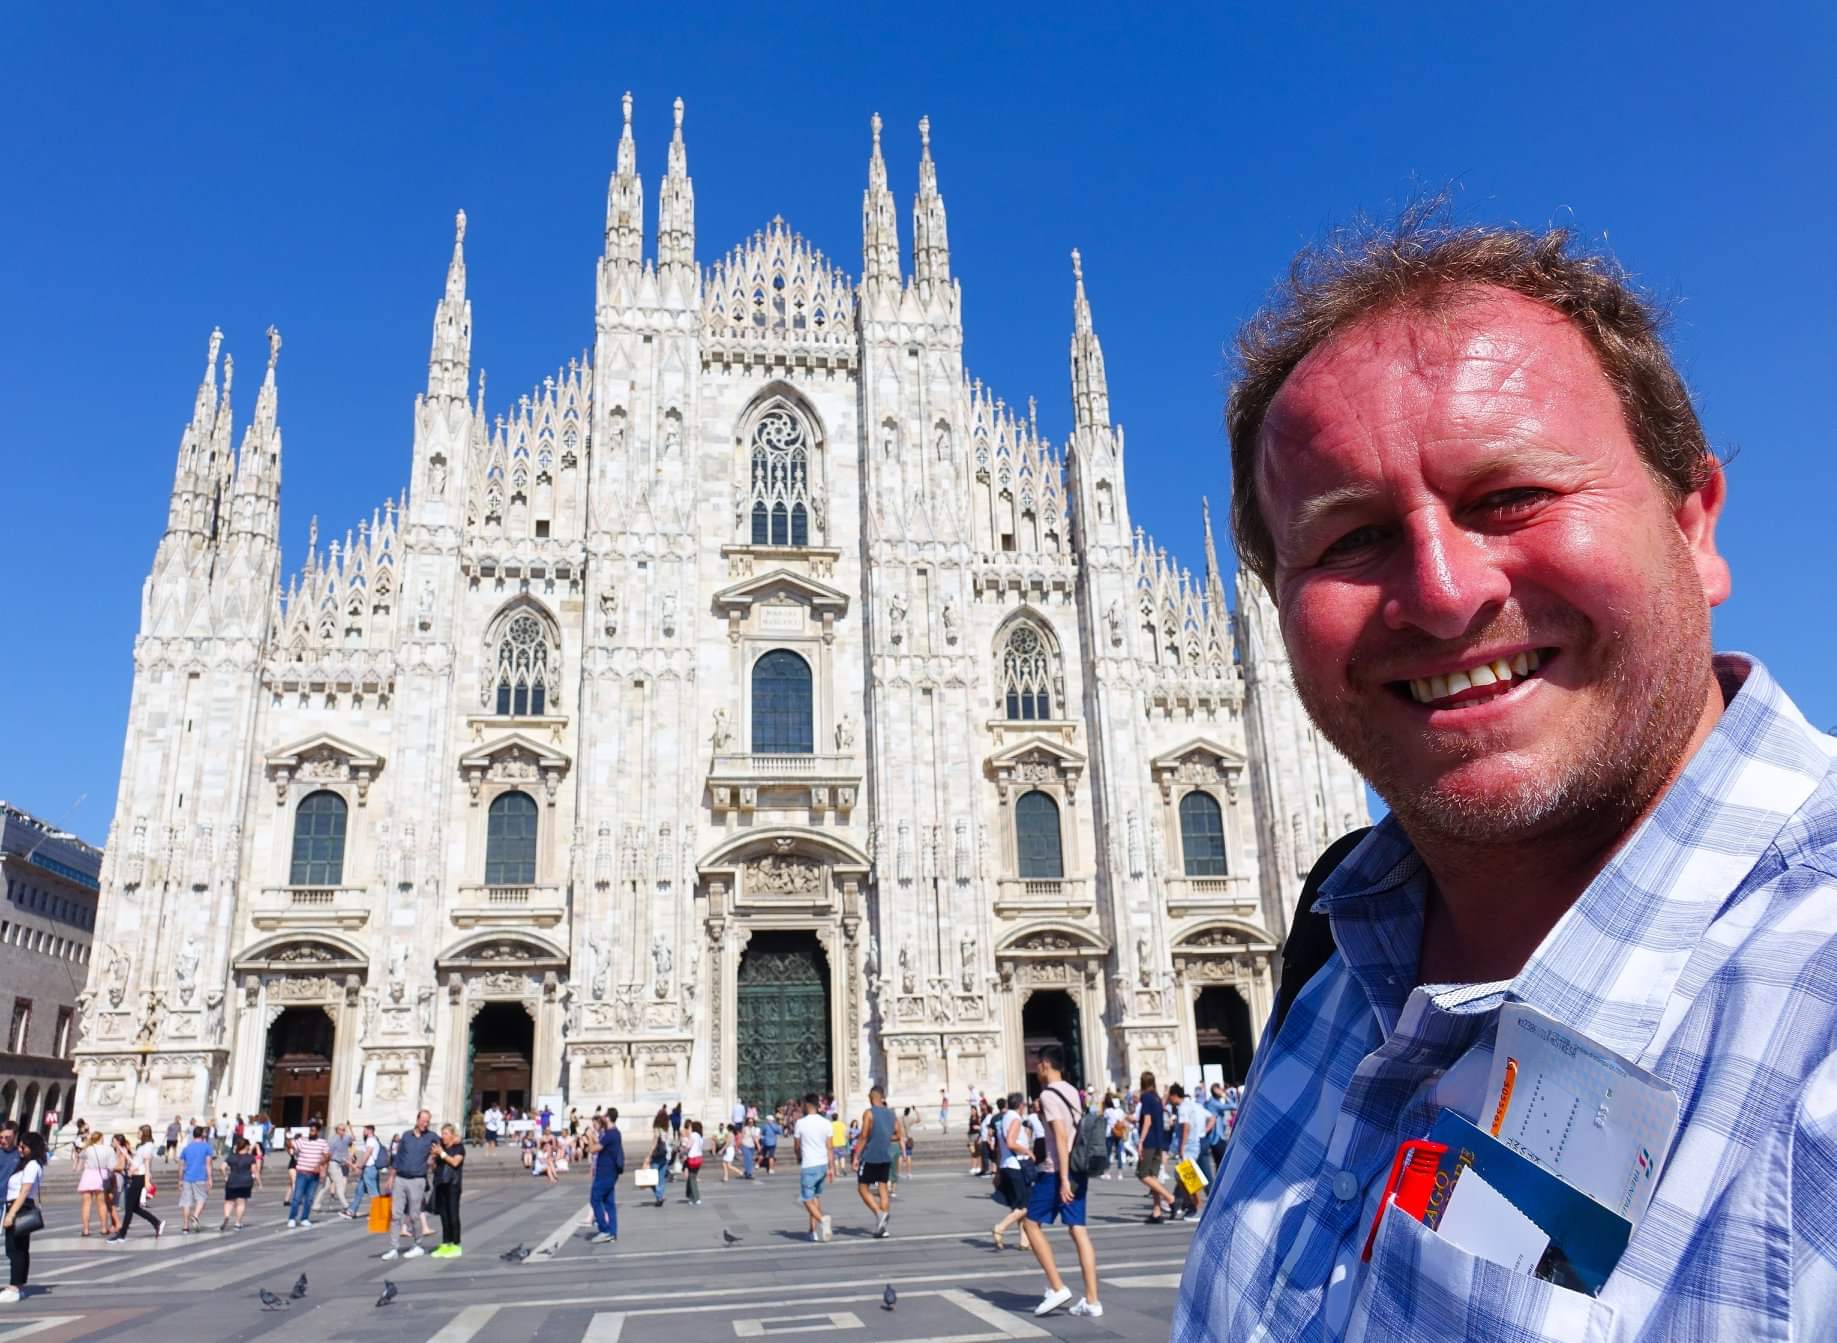 Milan, Italy. Visiting Italy's grandest Gothic cathedral